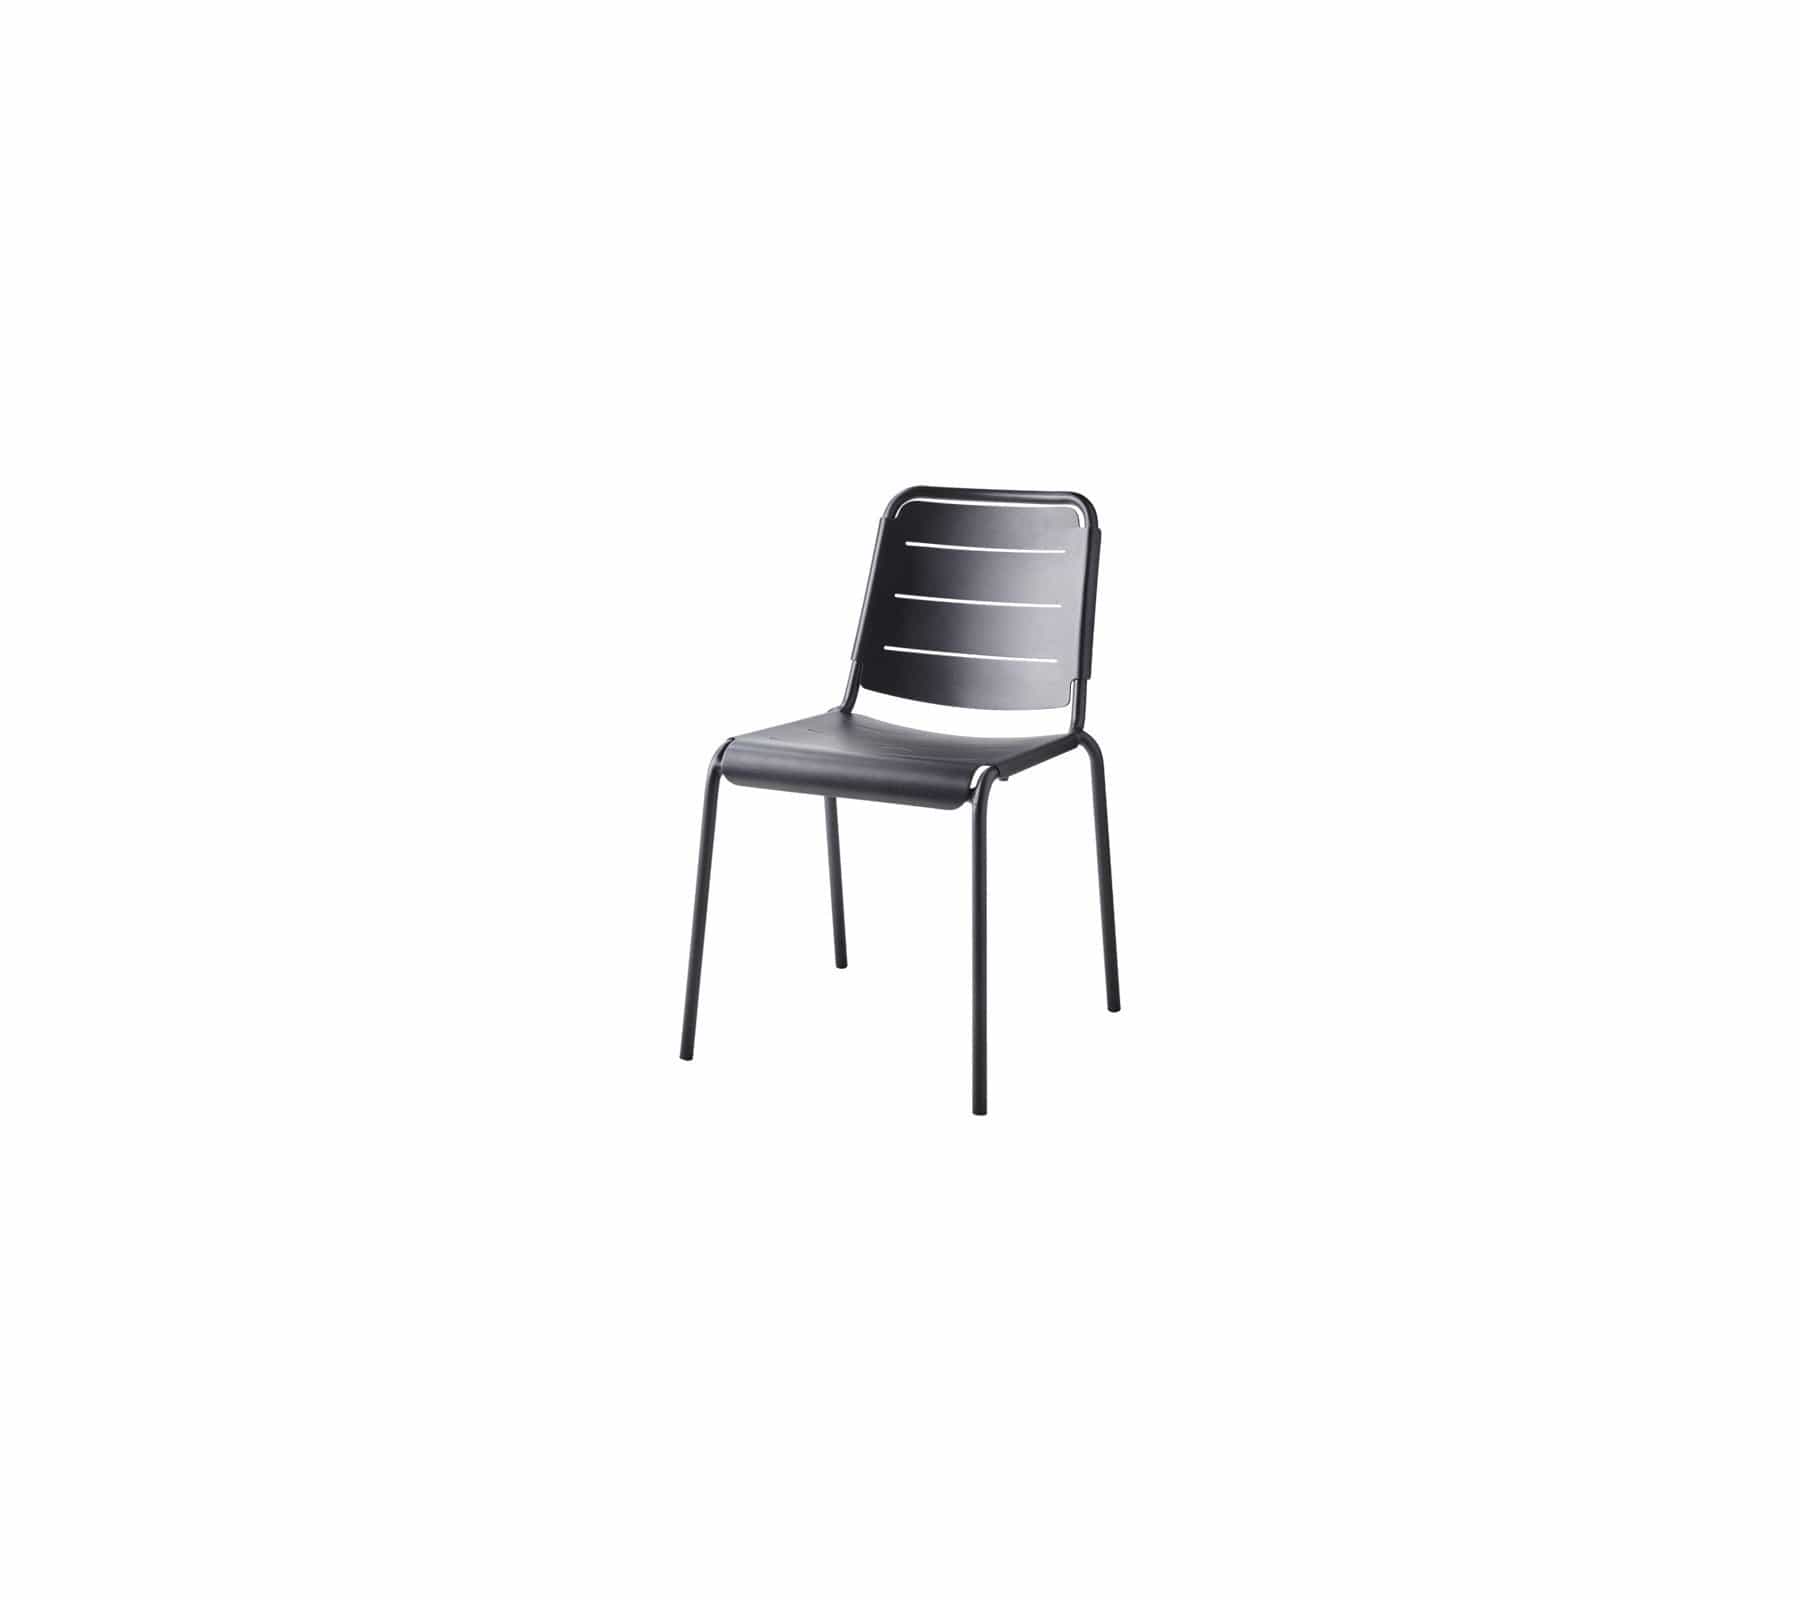 Cane-Line Denmark Outdoor Dining Chairs Lava Grey Cane-Line Copenhagen city chair, stackable